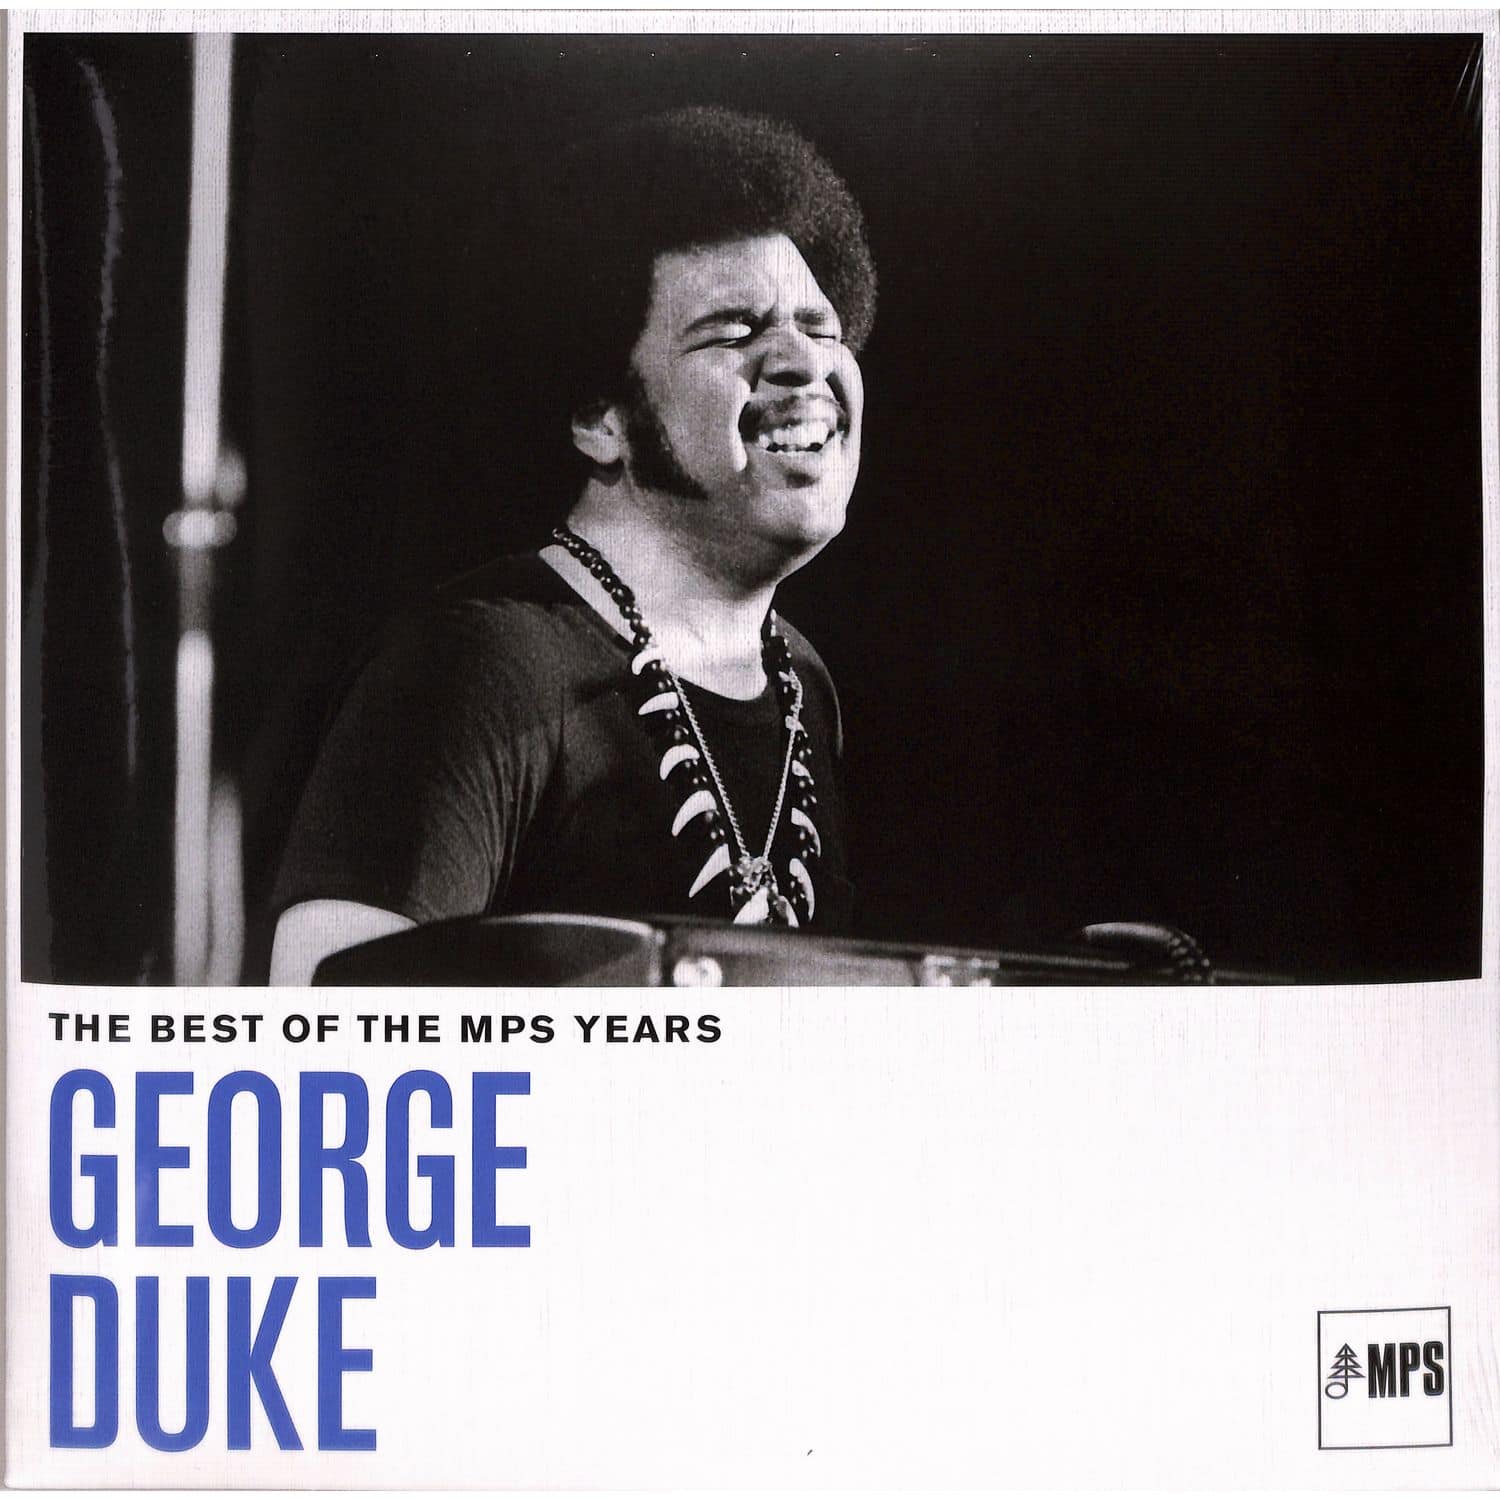 George Duke - THE BEST OF MPS THE YEARS 